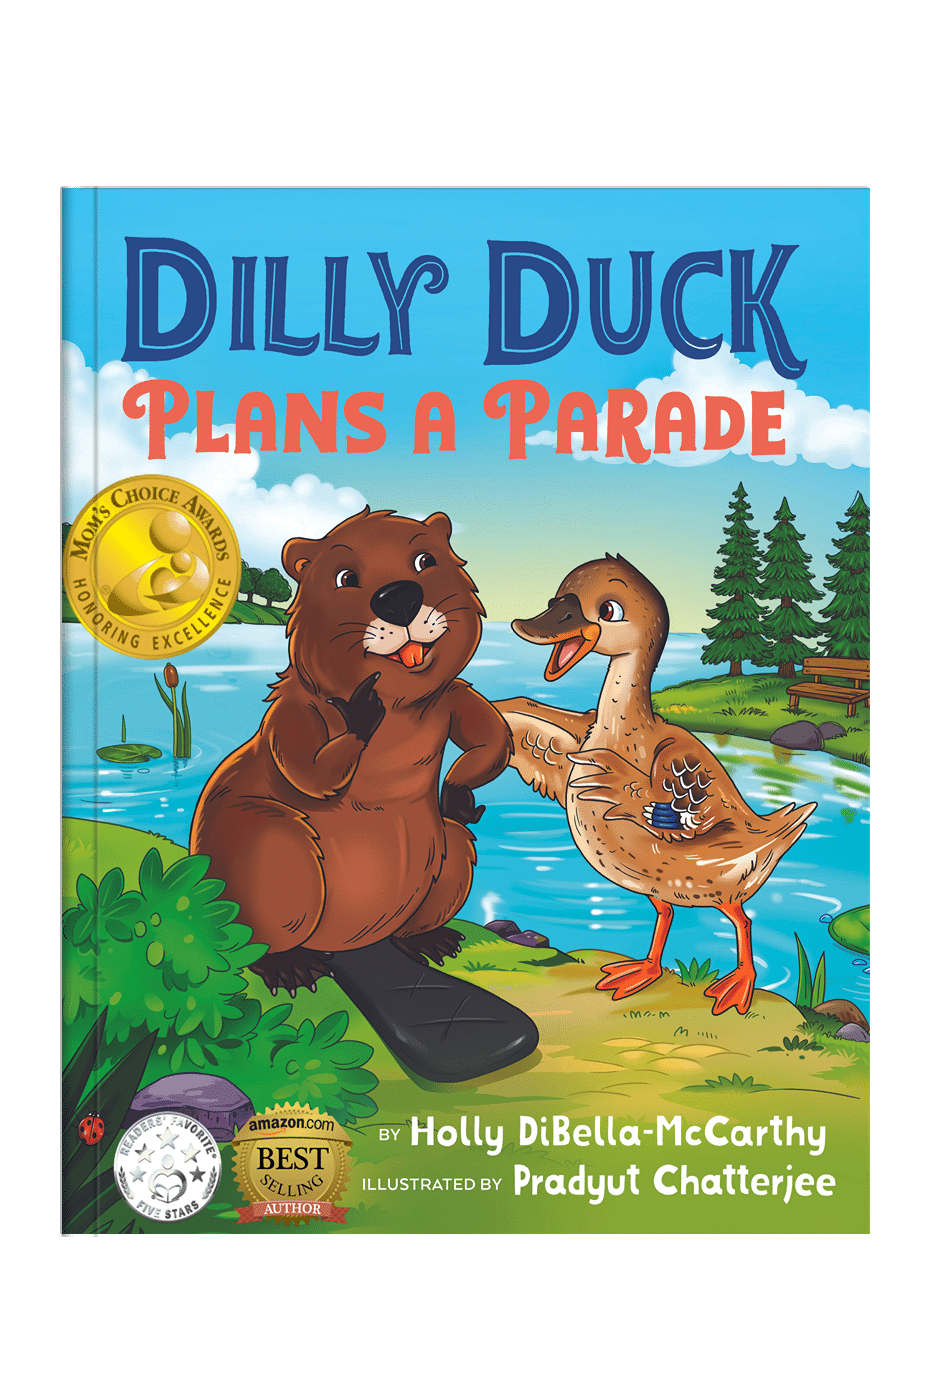 book cover of dilly duck plans a parade_book chatter press_holly dibella mccarthy